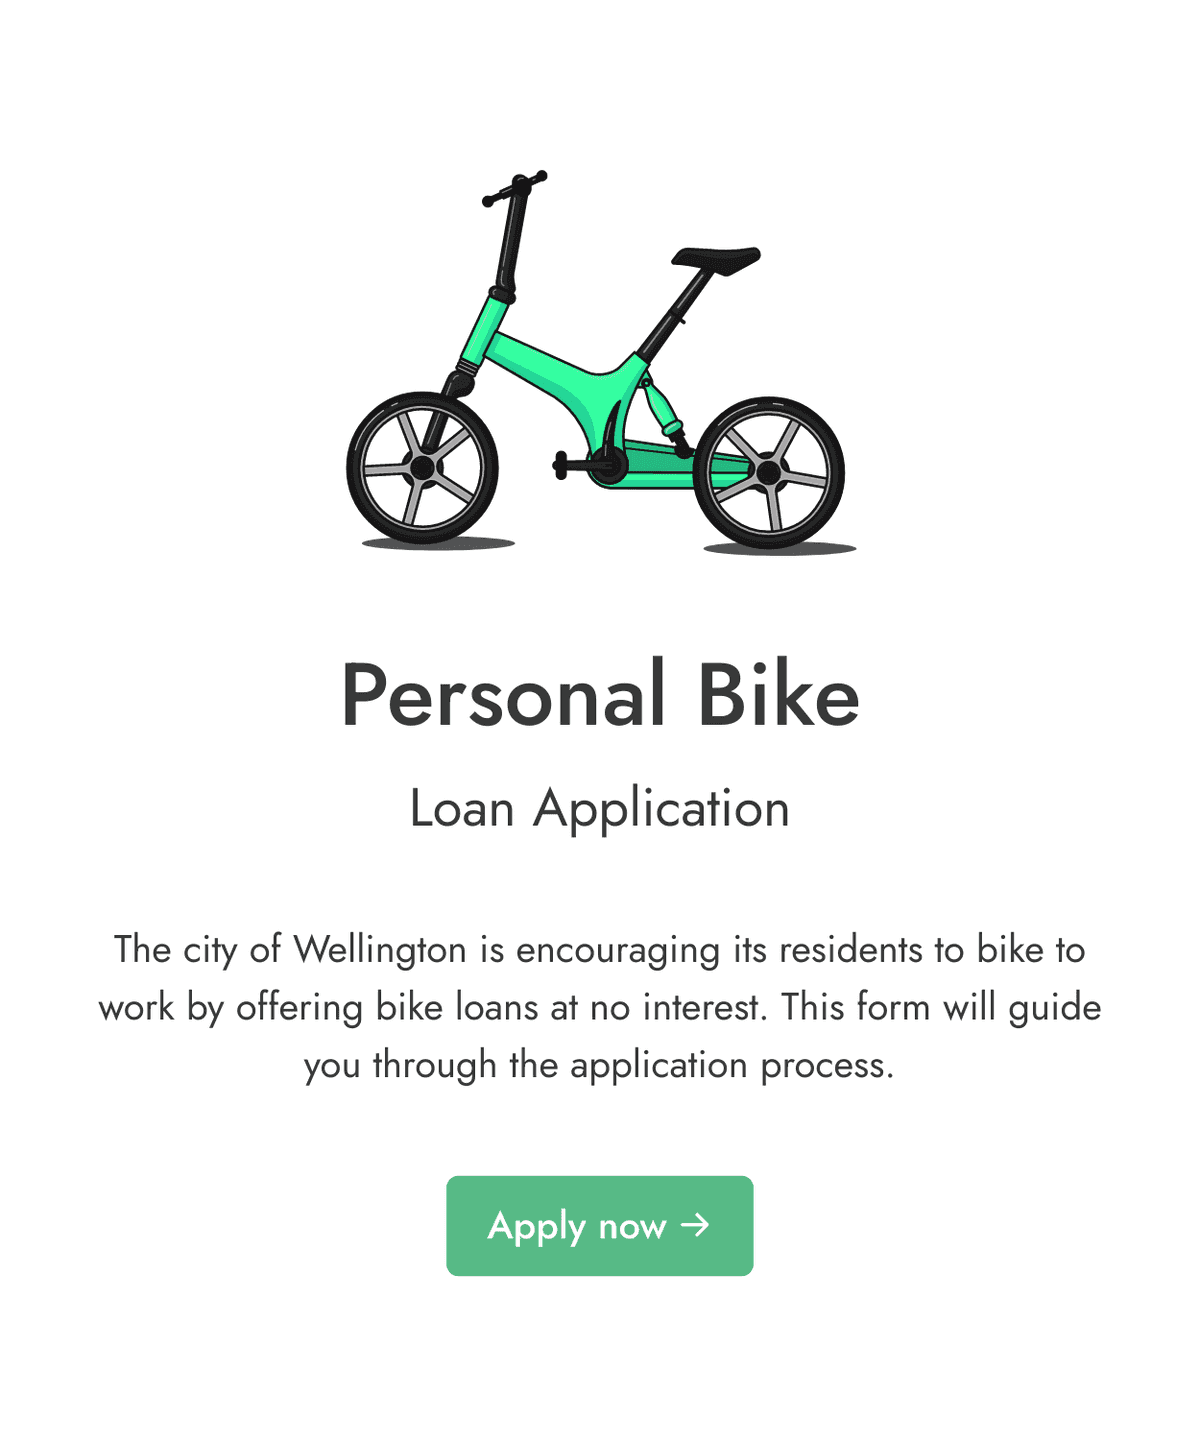 Welcome step of 'Bike loan application form' with an image, introduction text, and a 'Apply now' button